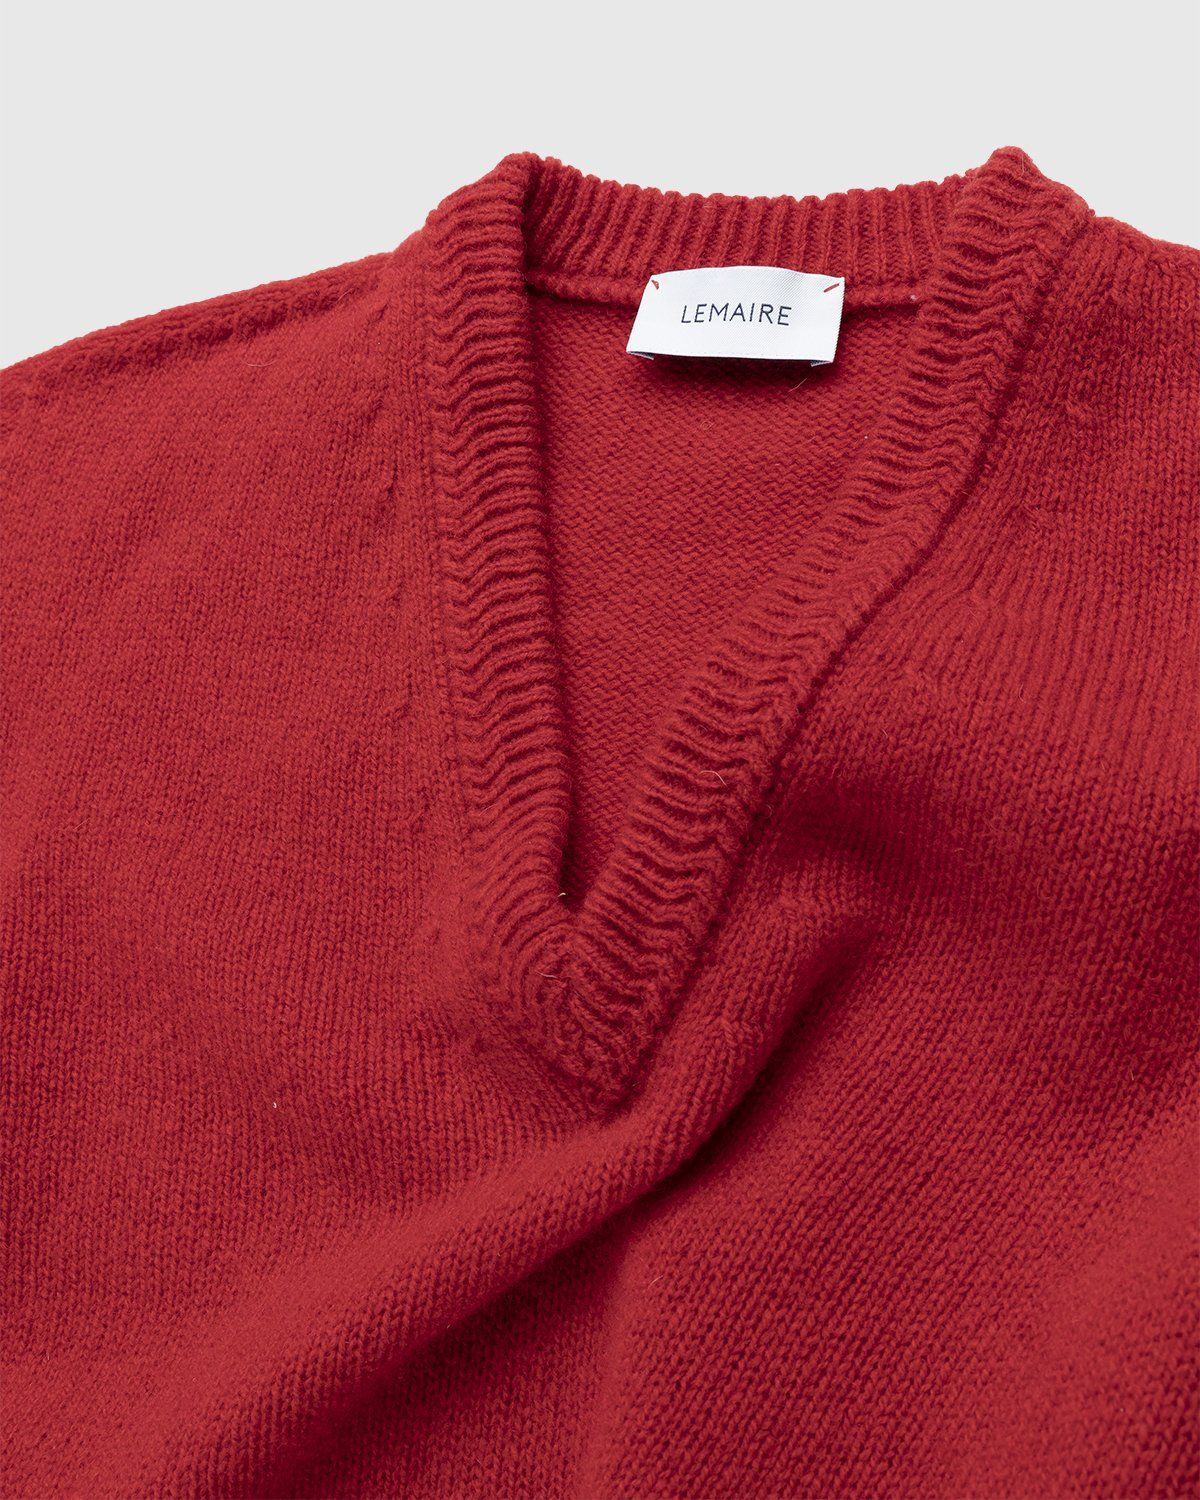 Lemaire – Seamless Shetland Wool V-Neck Sweater Poppy Red - Knitwear - Red - Image 3